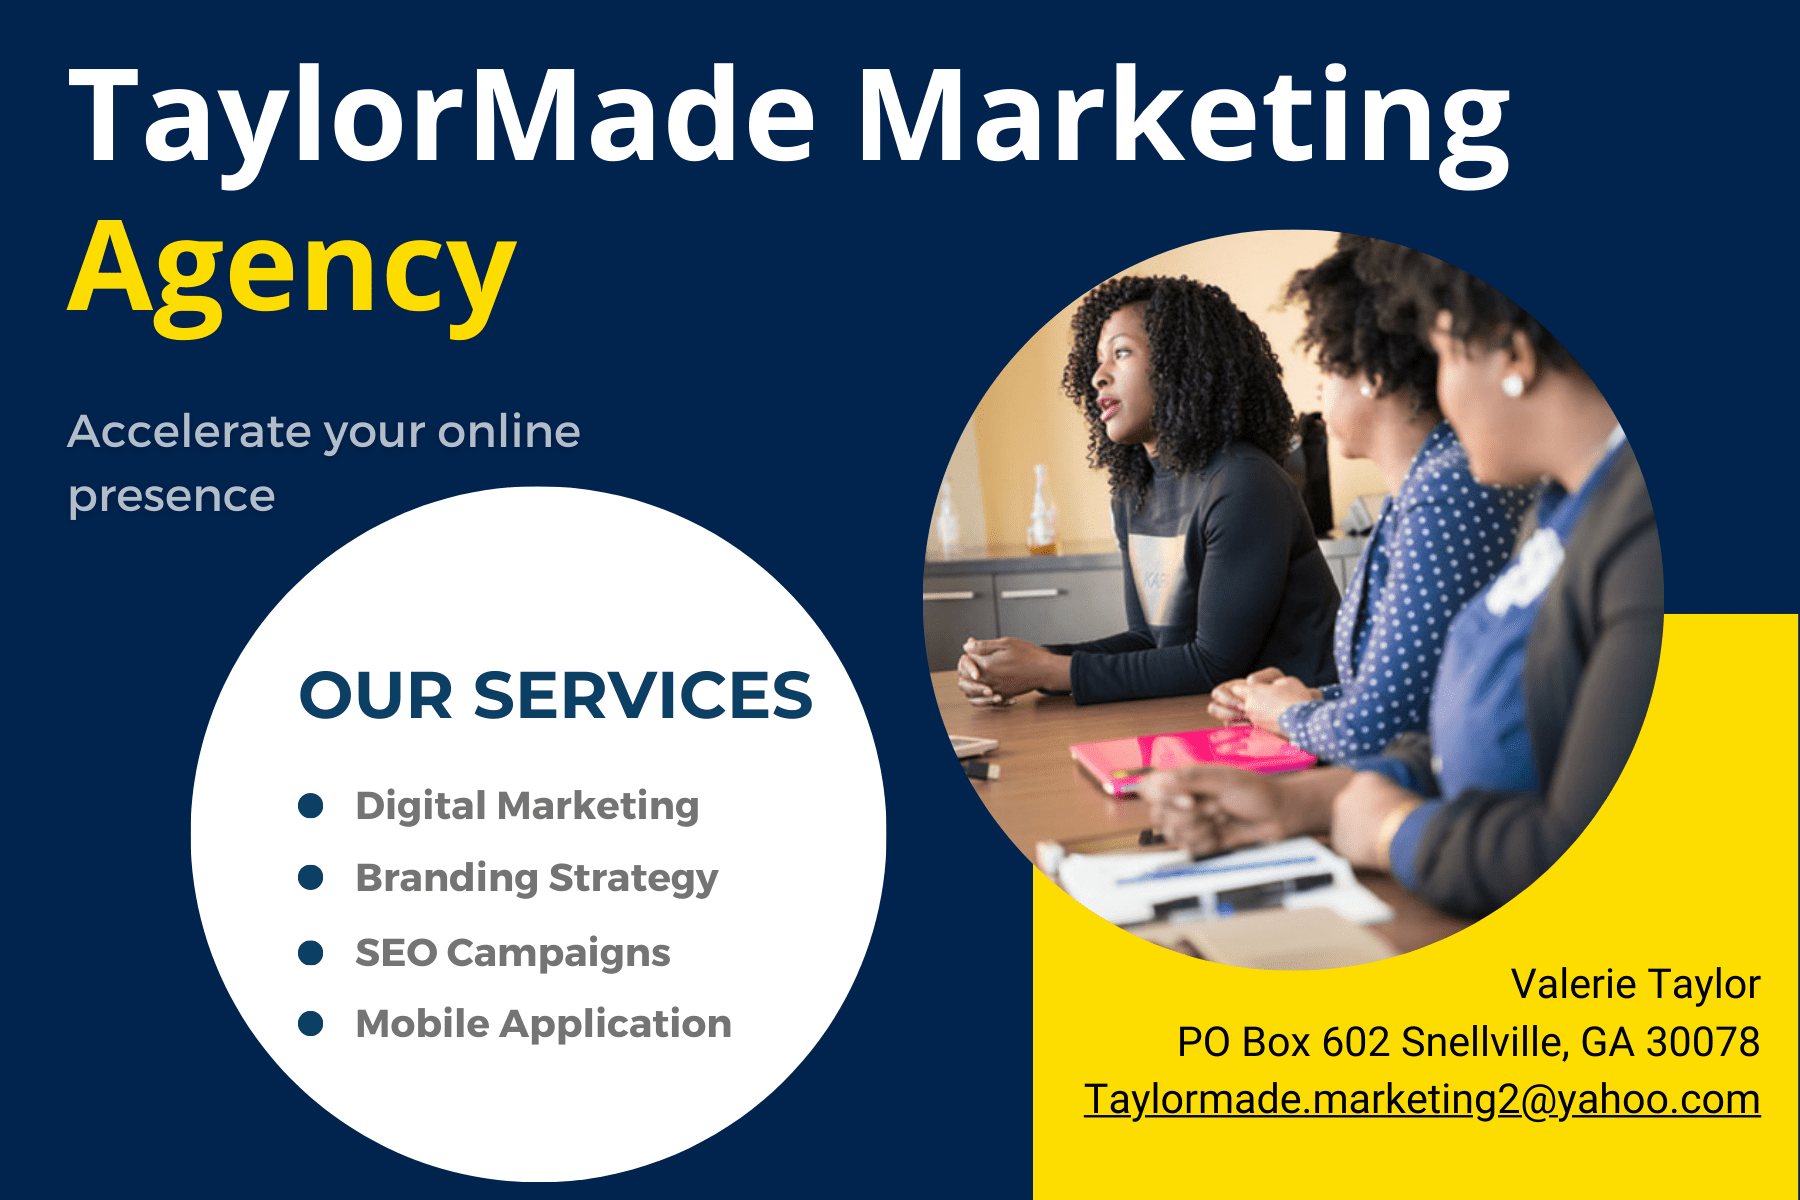 Featured image for “TaylorMade Marketing Agency”